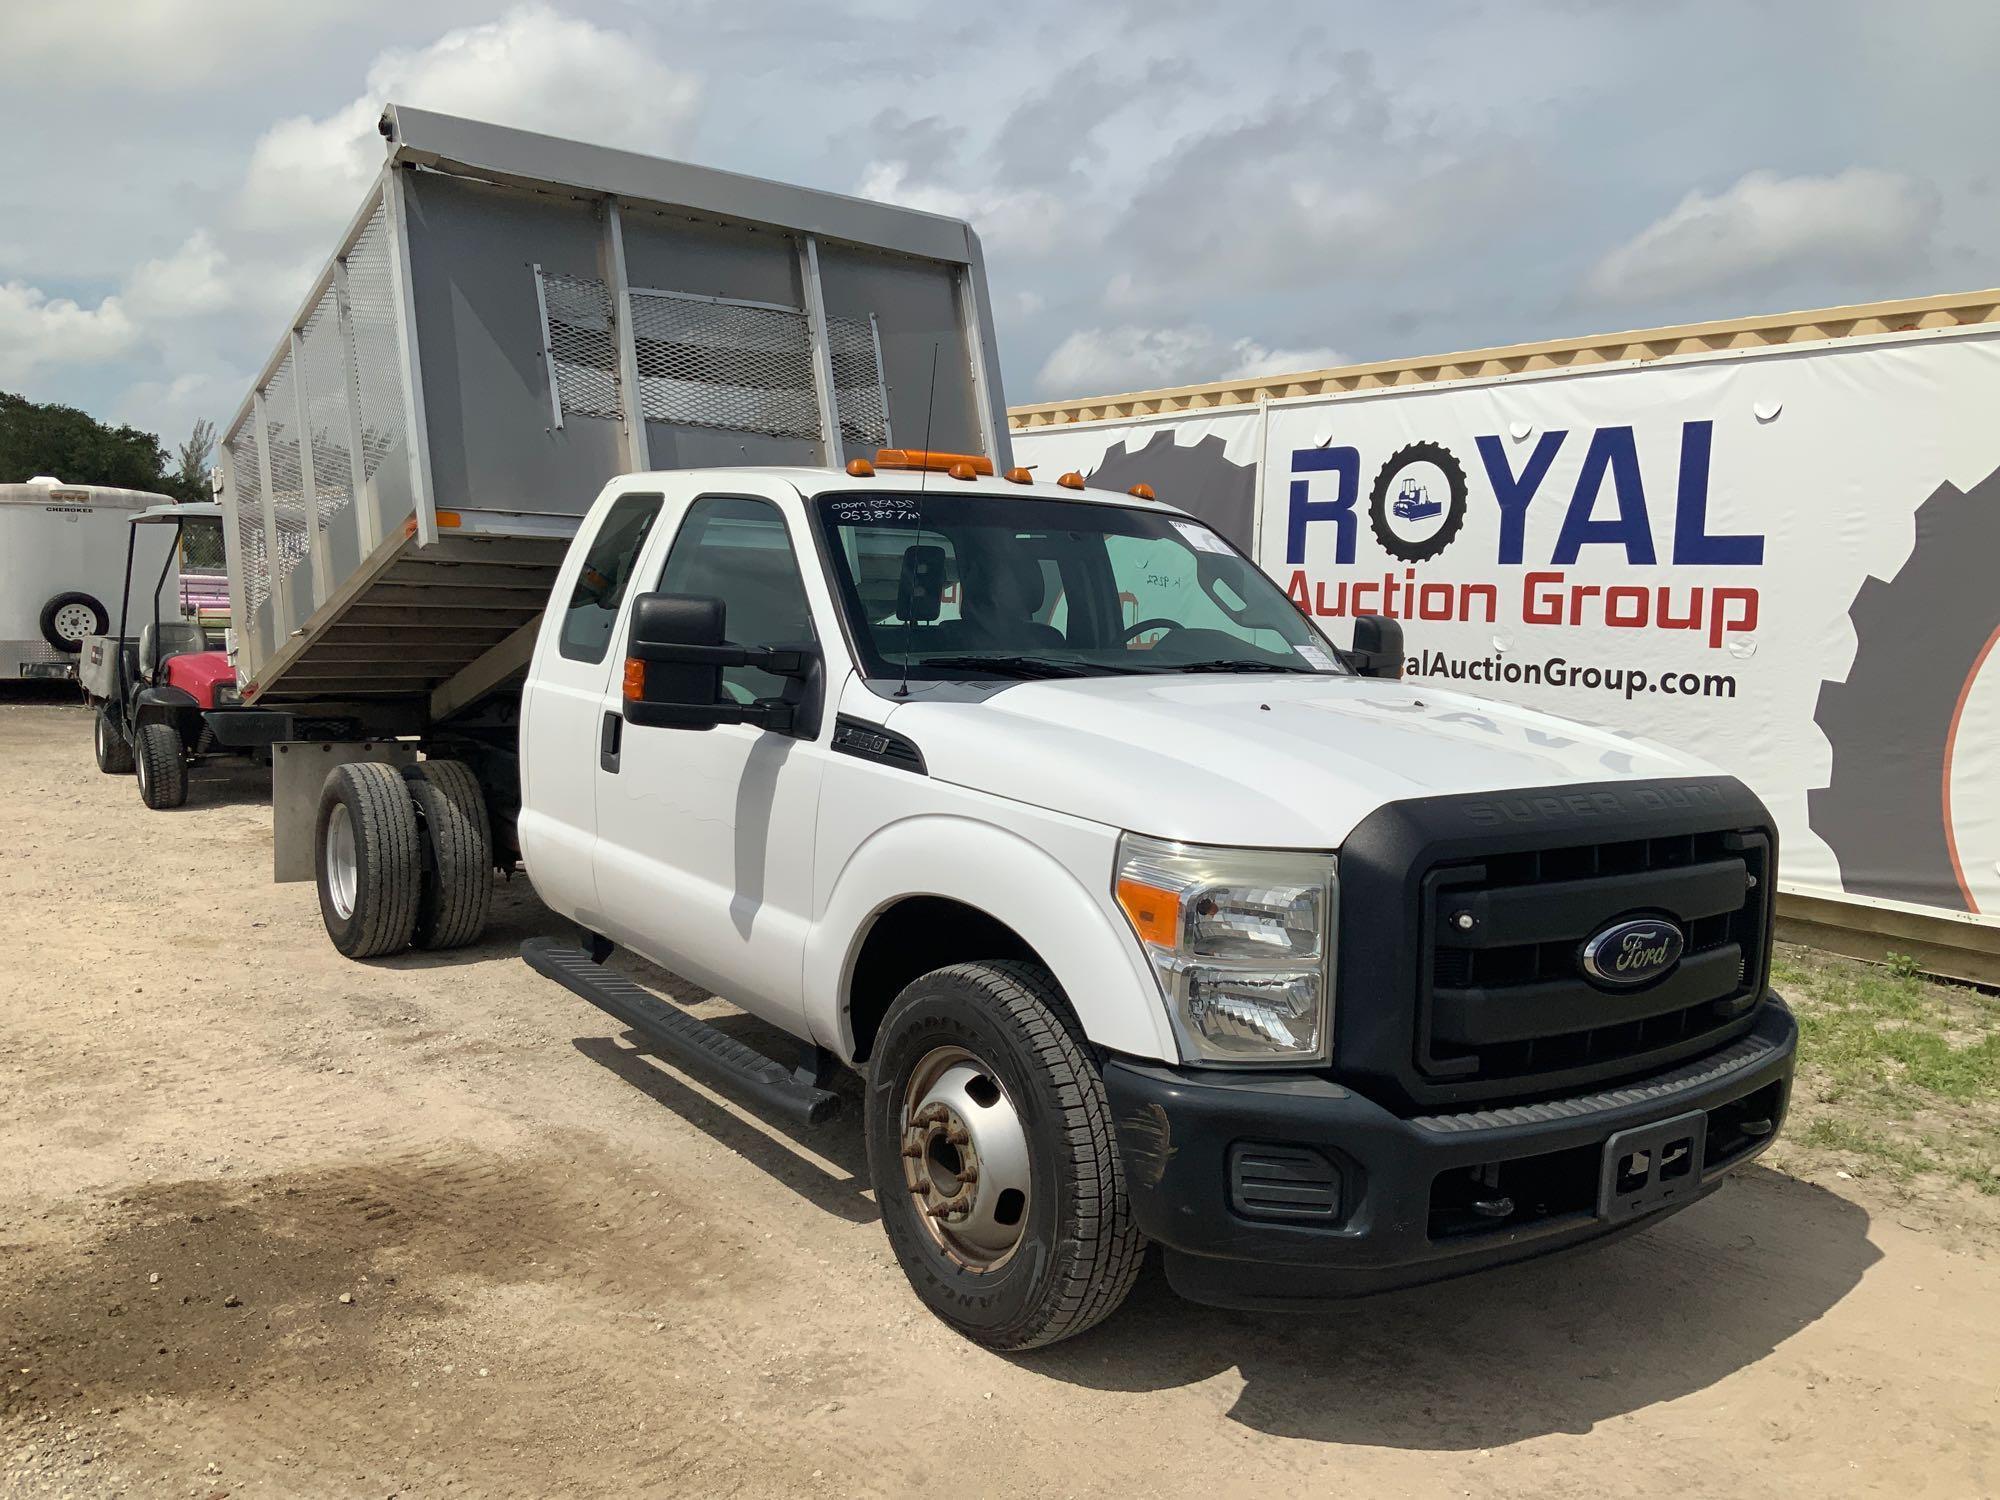 2012 Ford F-350 Extended Cab Landscape Dump Truck